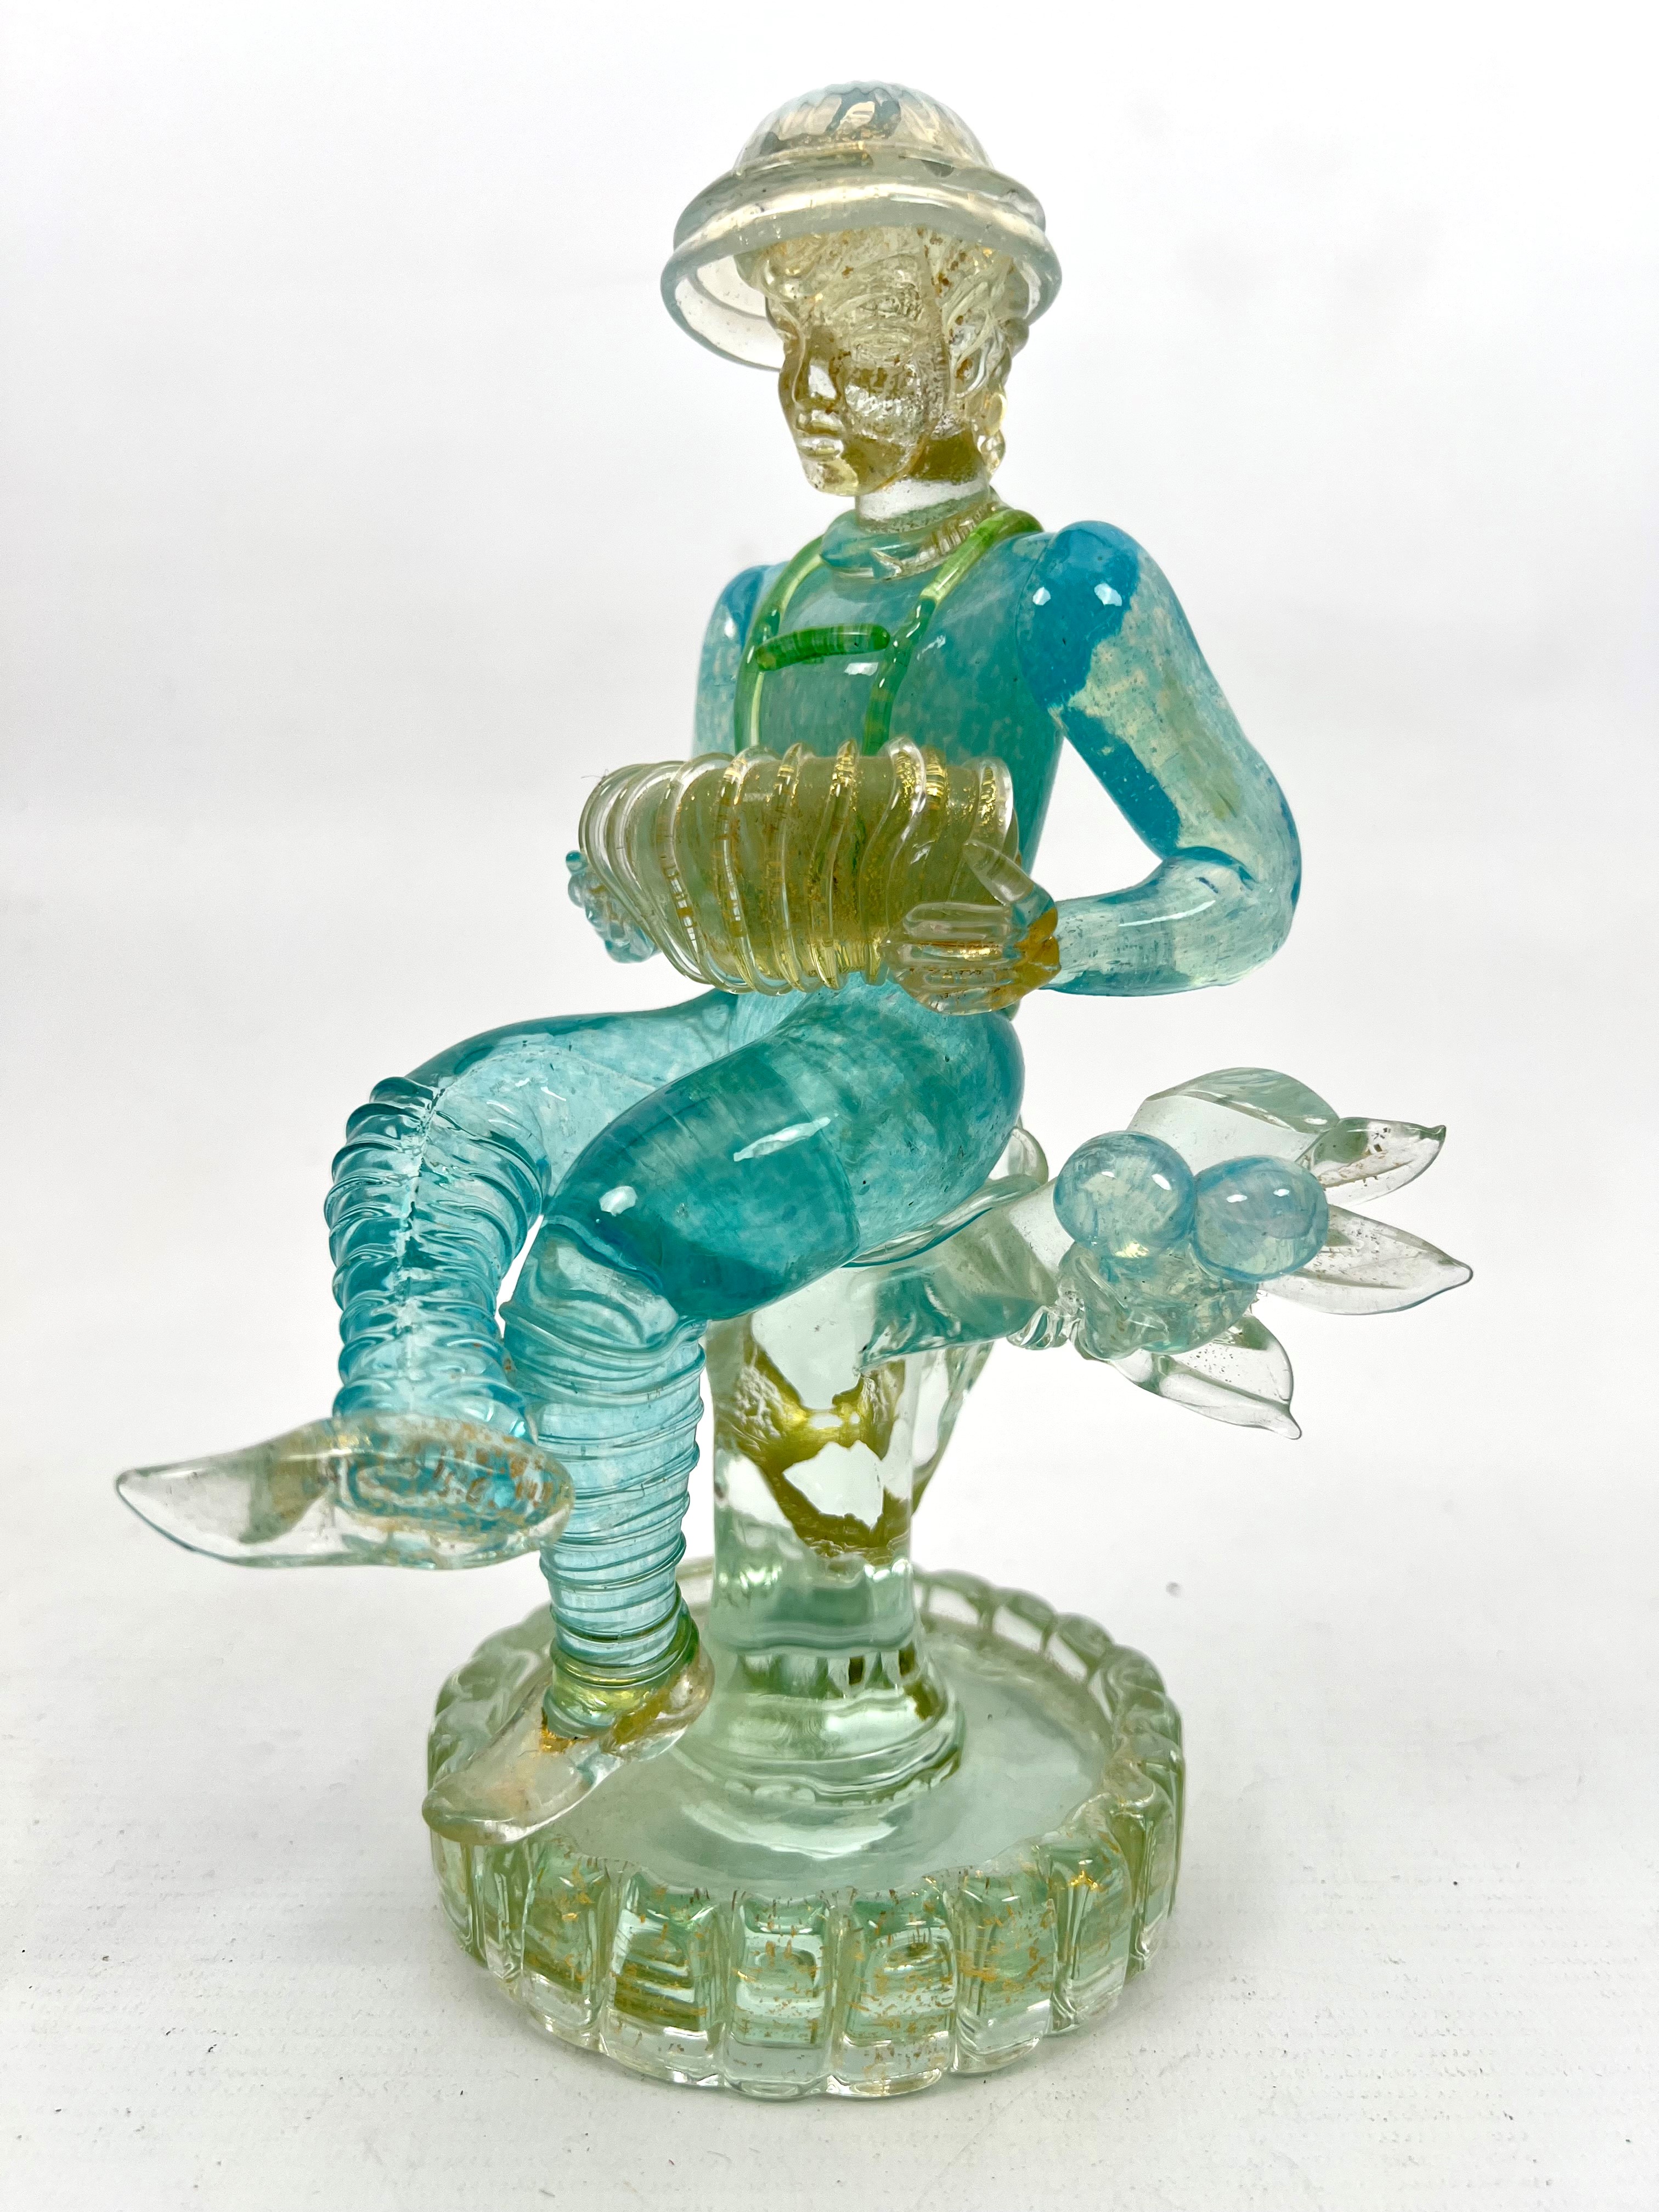 A Murano glass figure of a seated accordion player by Ercole Barovier for Ferro Barovier Toso - in